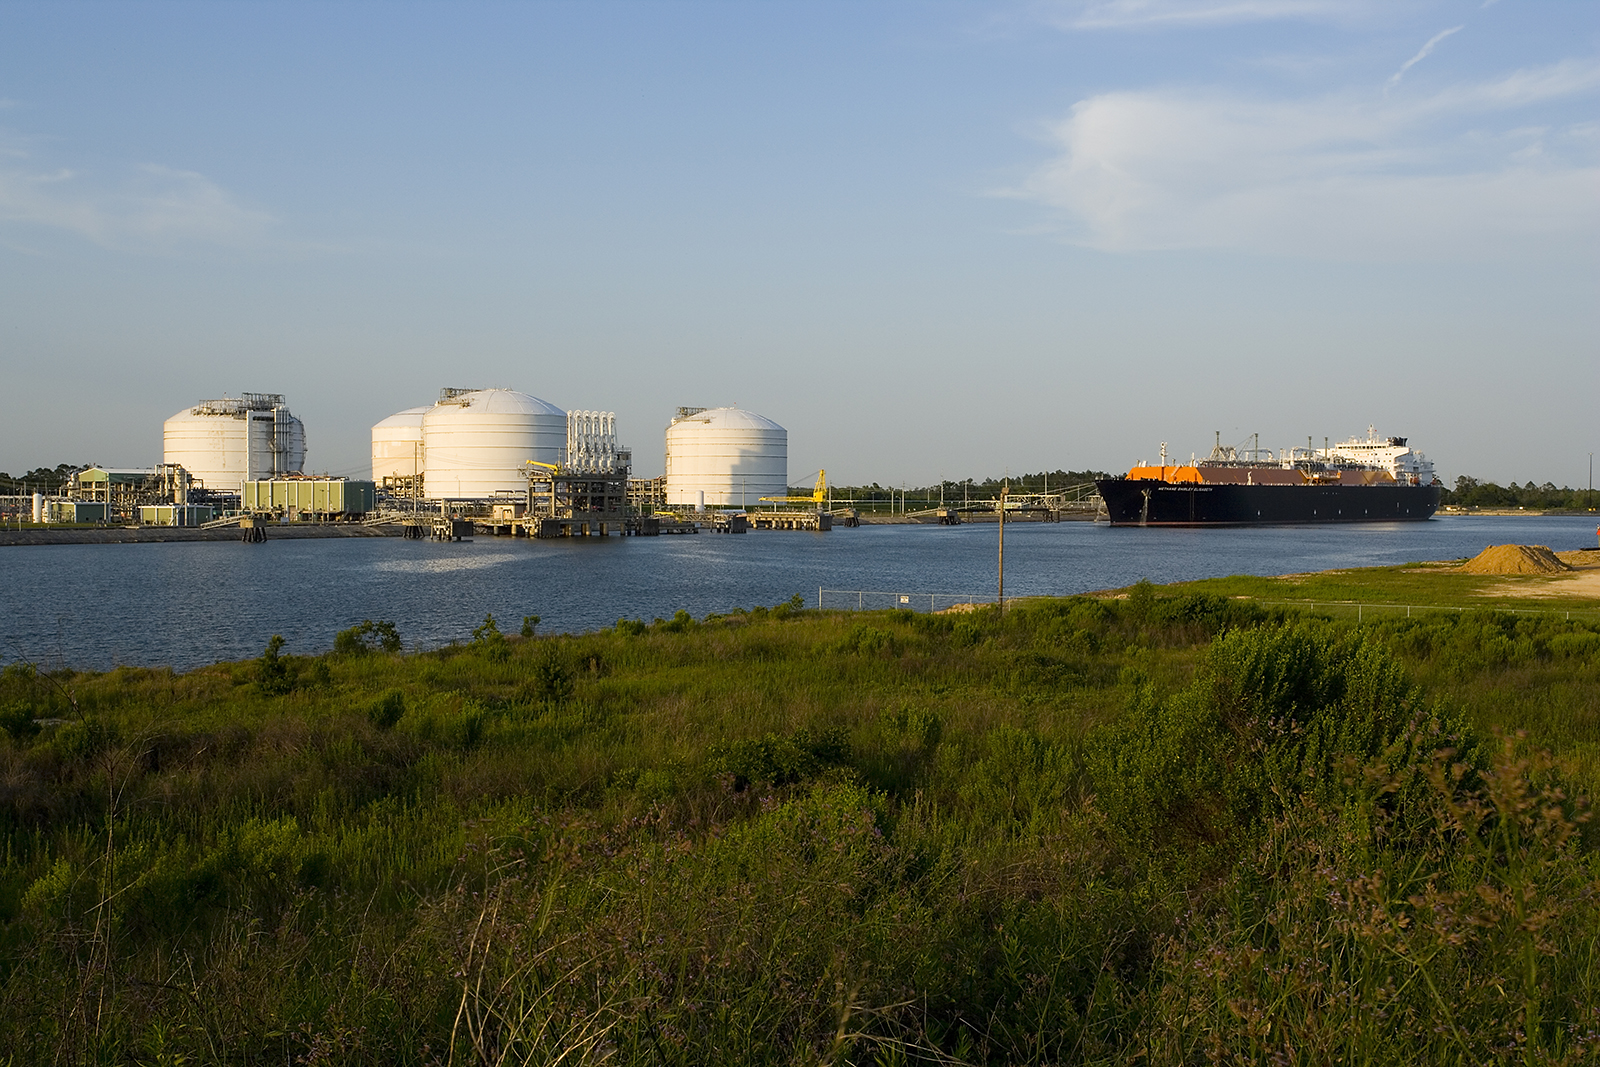 Lake Charles LNG looking to push construction deadline to 2019